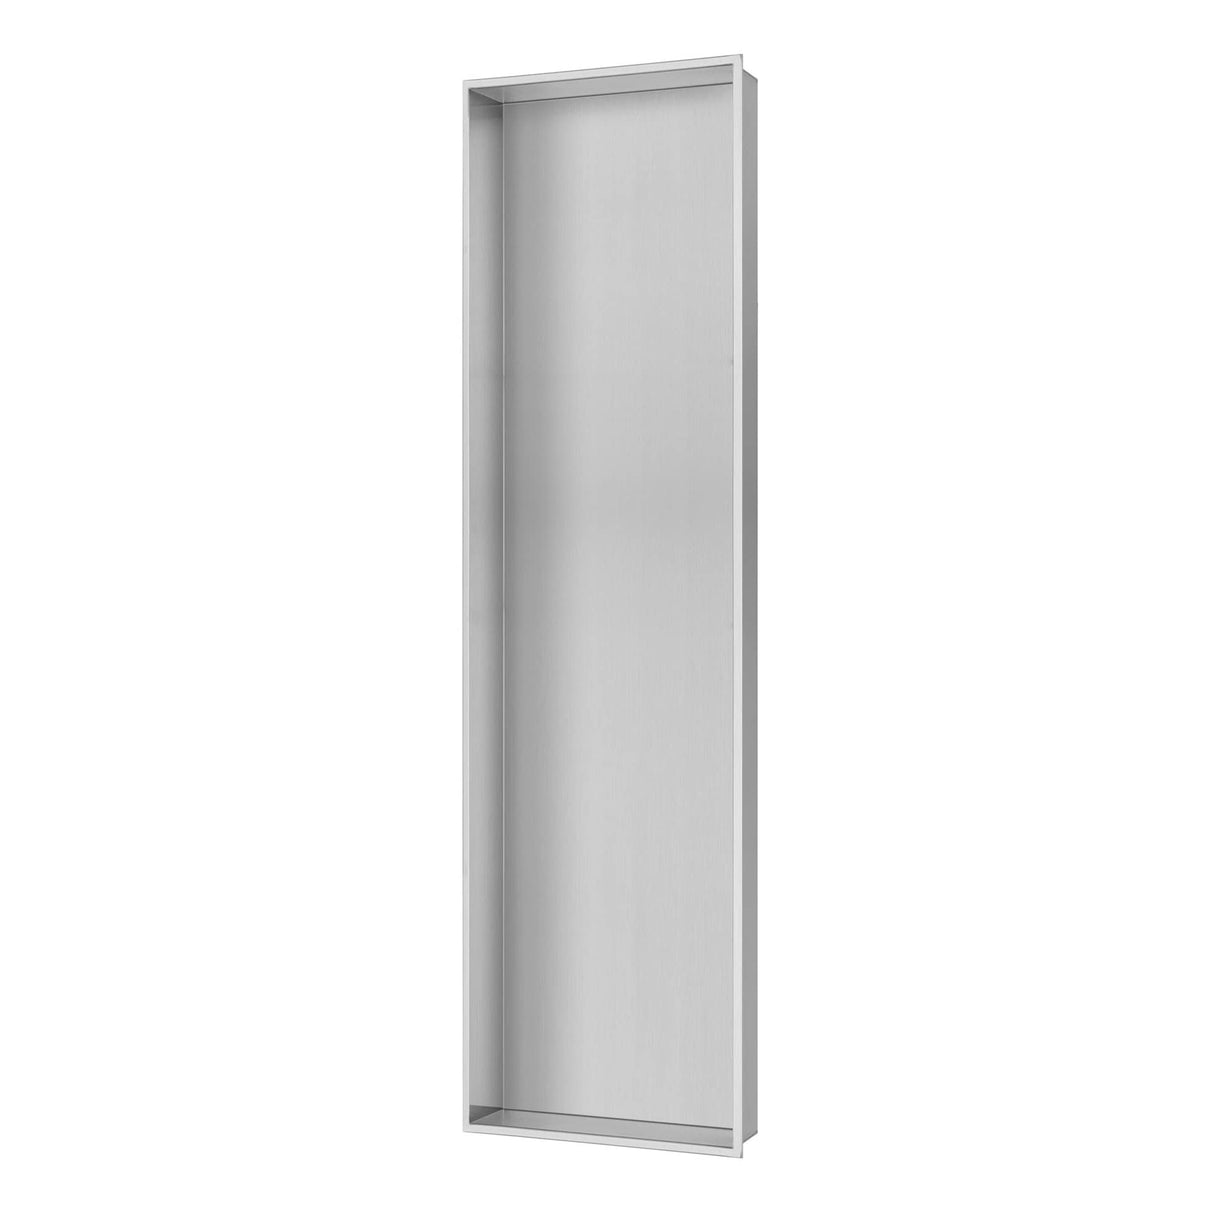 PULSE ShowerSpas NI-1248-SSB Niche in Brushed Stainless Steel